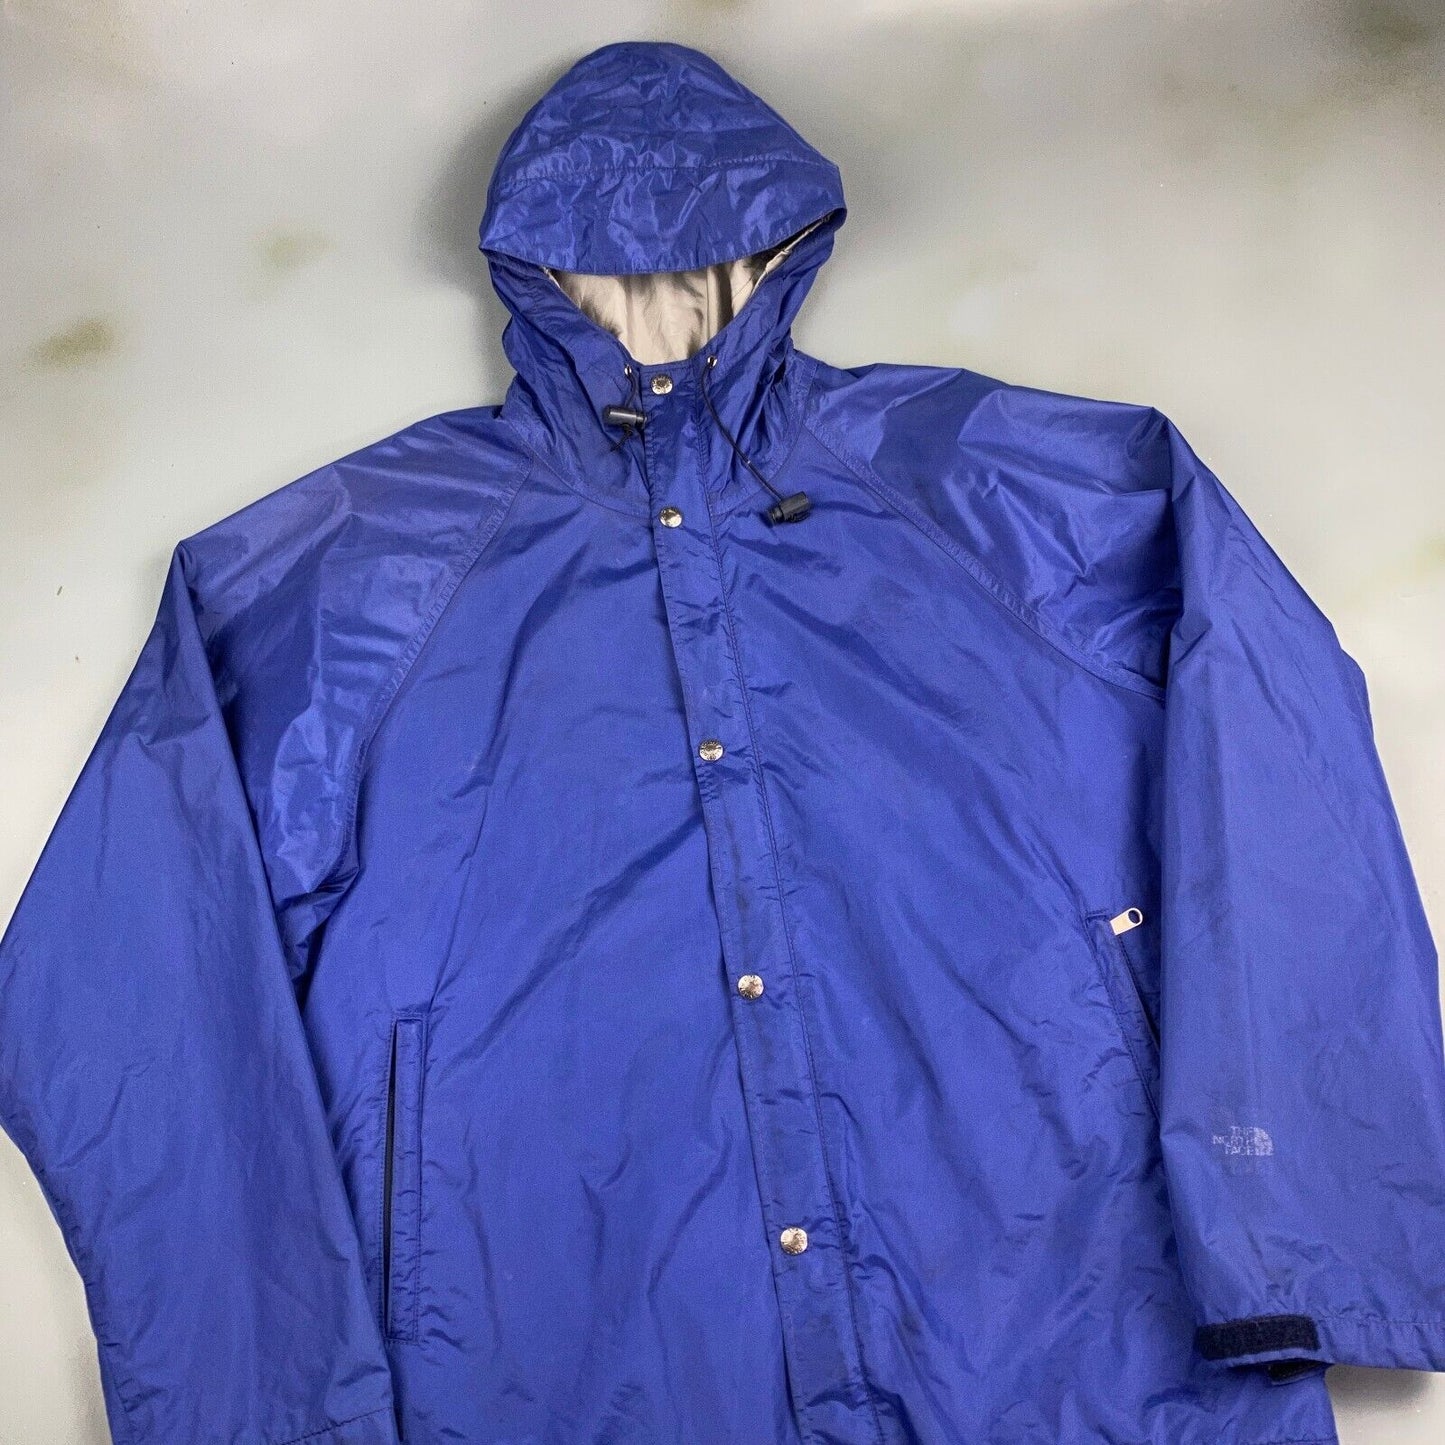 VINTAGE 90s The North Face Blue Gore-tex Windbreaker Jacket sz Large Adult